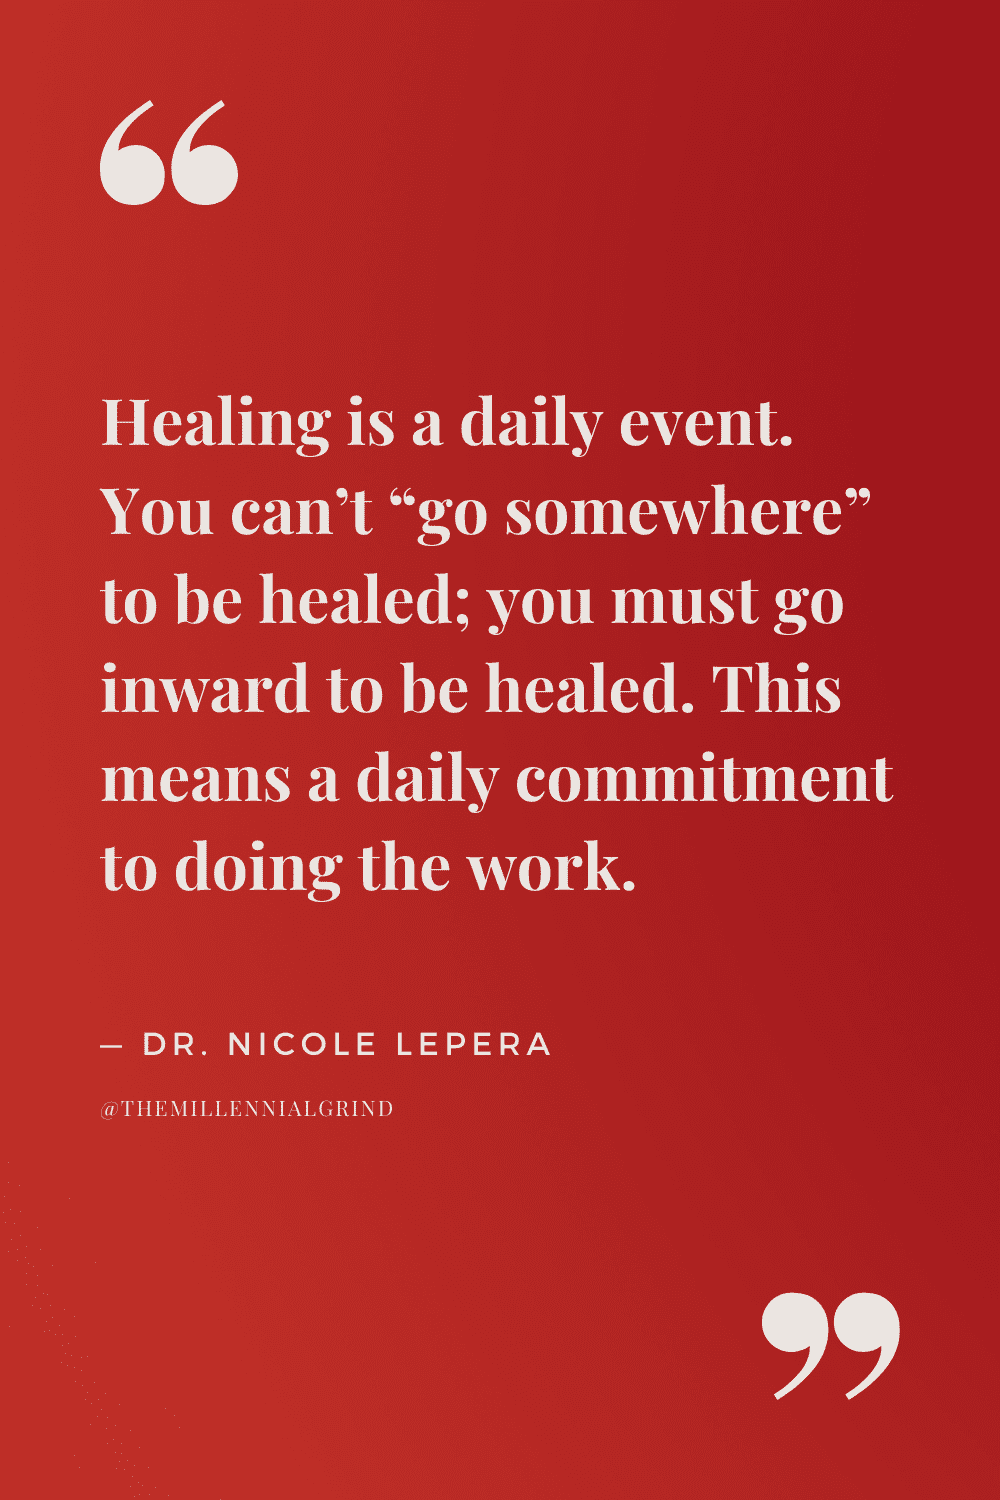 30 Quotes from How to Do the Work by Nicole LePera